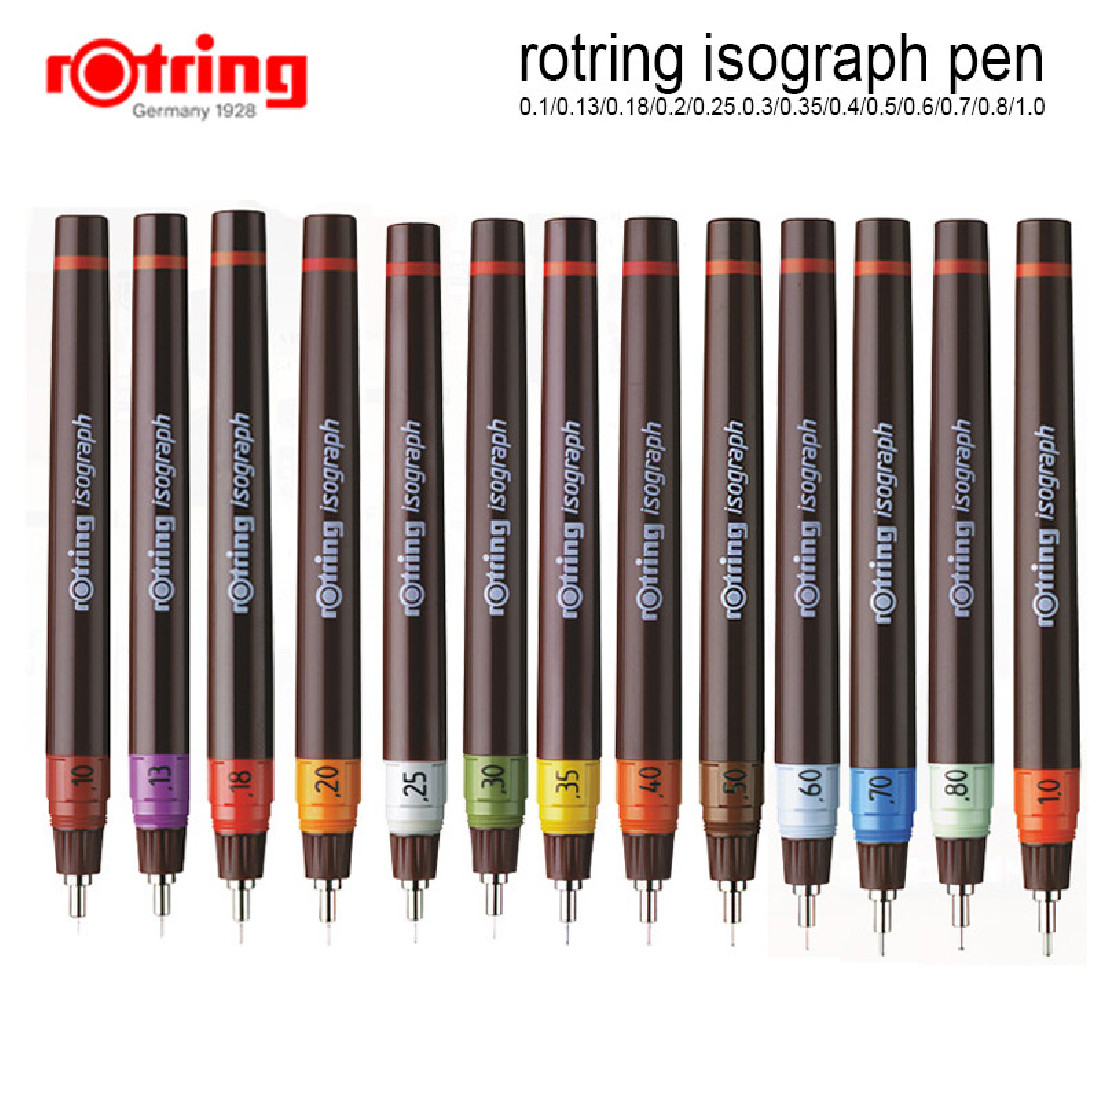 Rotring Isograph pen 0,4mm